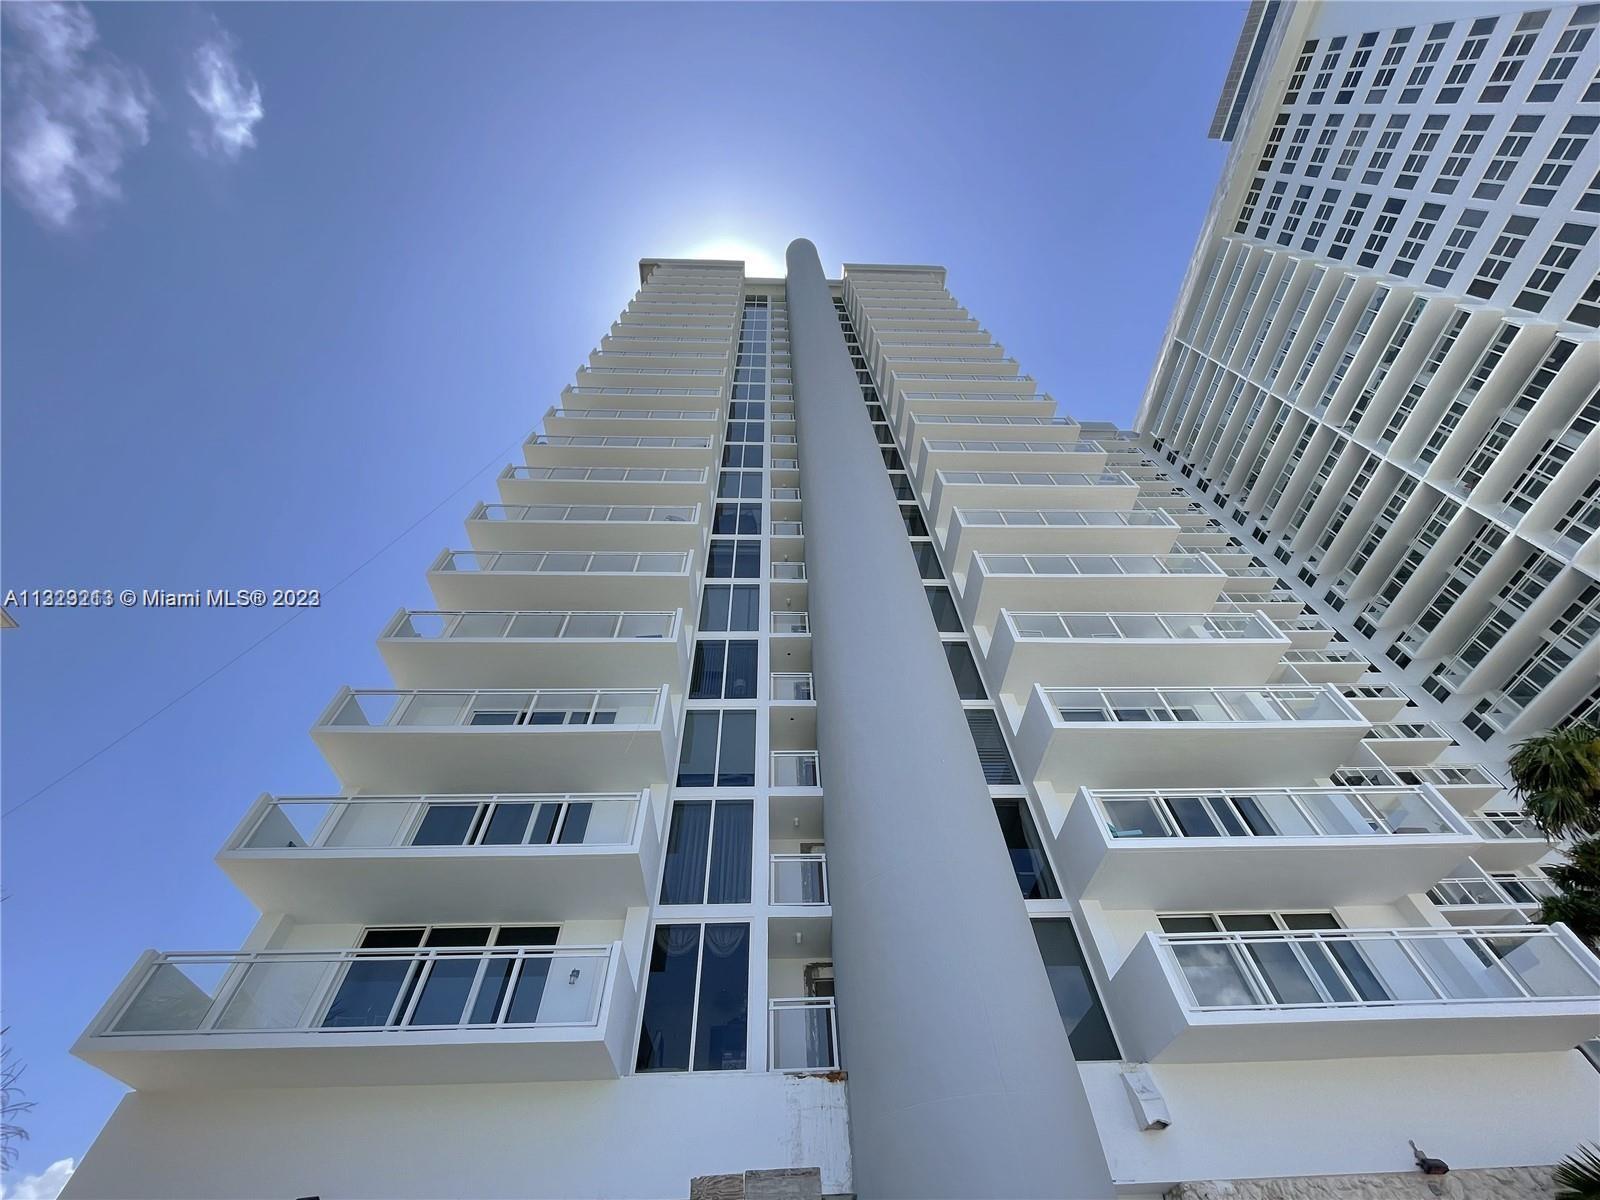 PERFECTLY PRICED & AN EXCELLENT OPPORTUNITY TO OWN AN OCEANFRONT RESIDENCE WITH OCEAN VIEWS & COLLEC